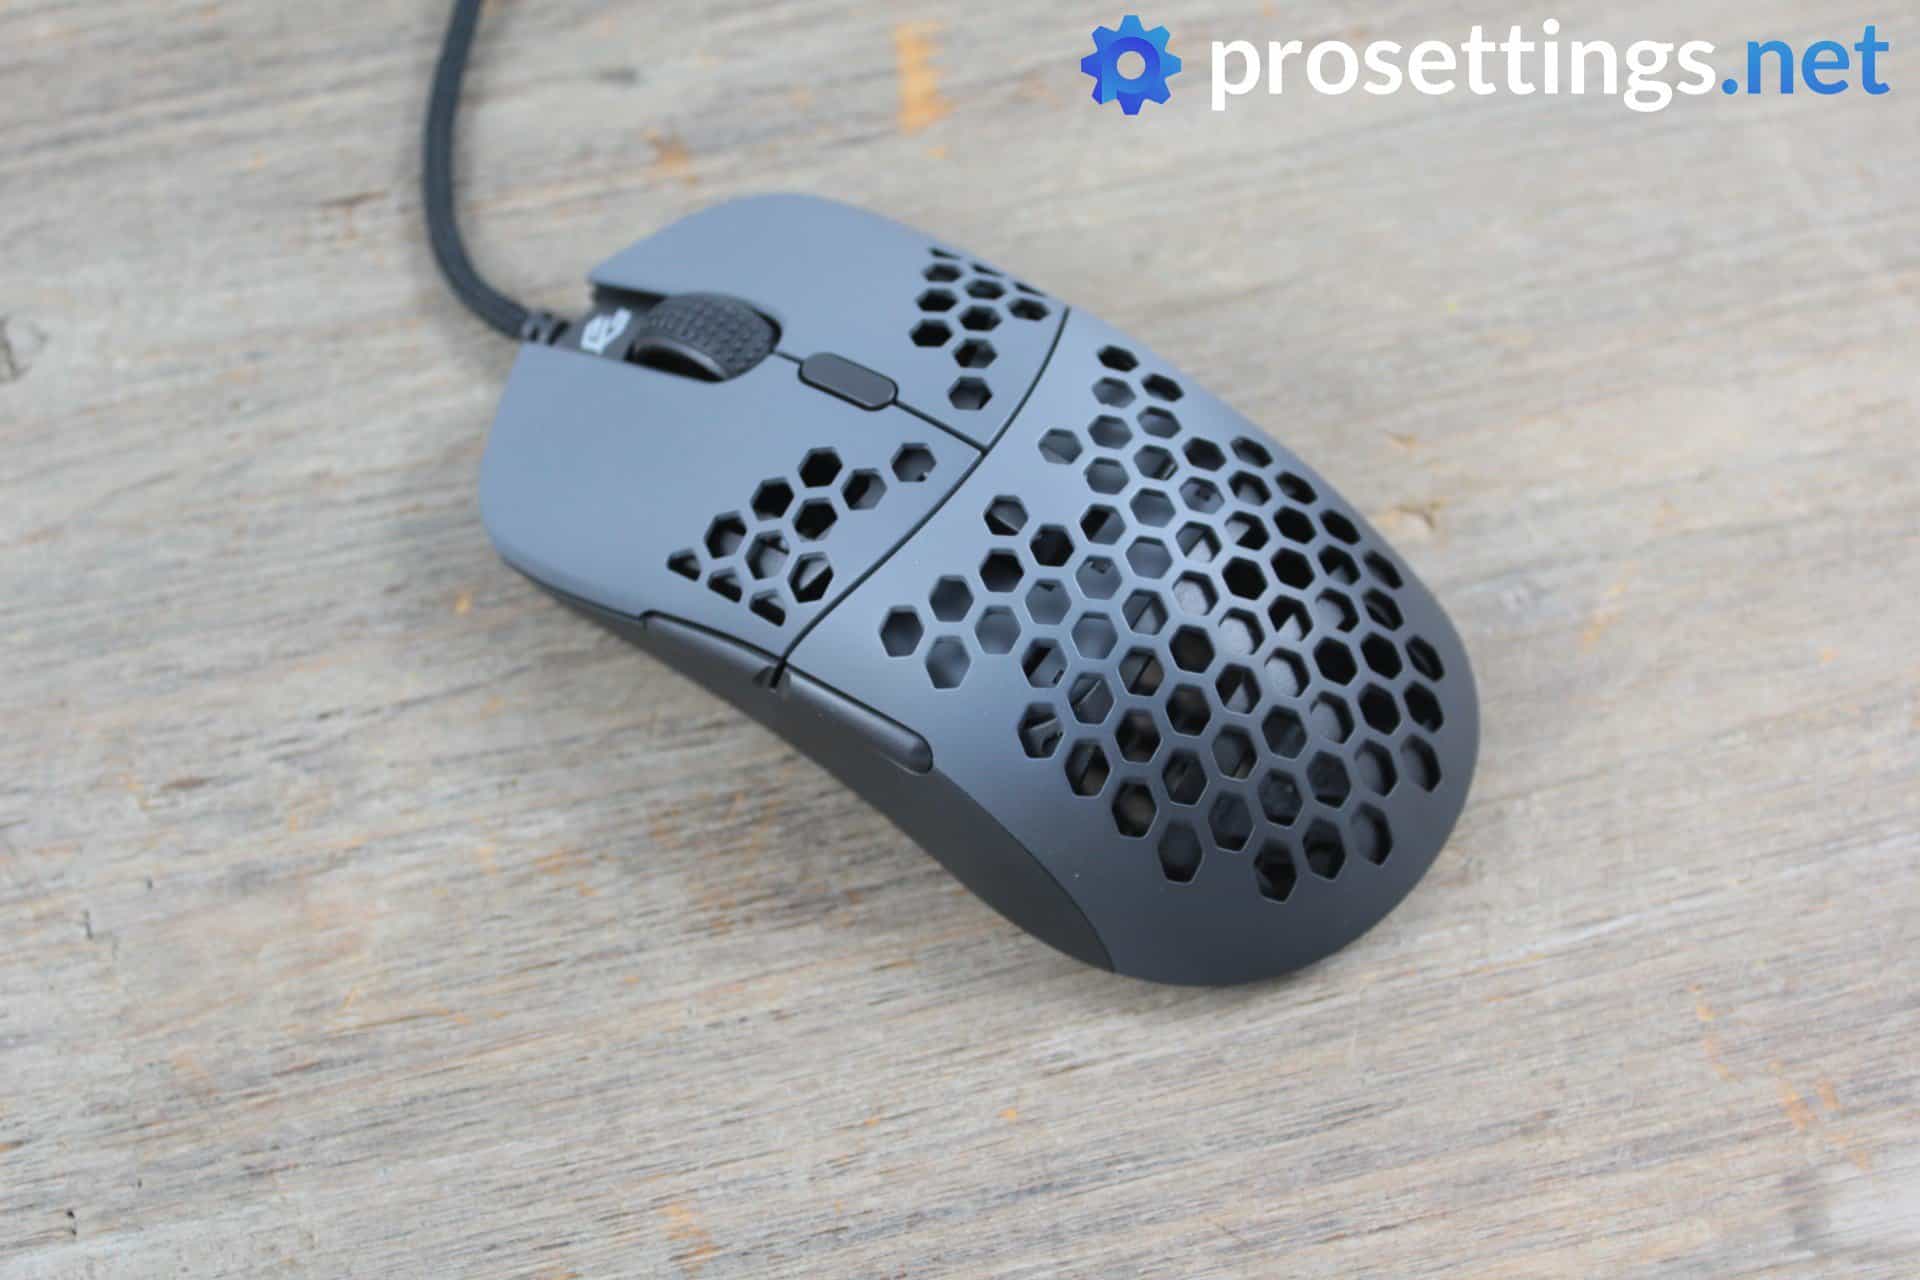 G-Wolves HT-M Mouse Review